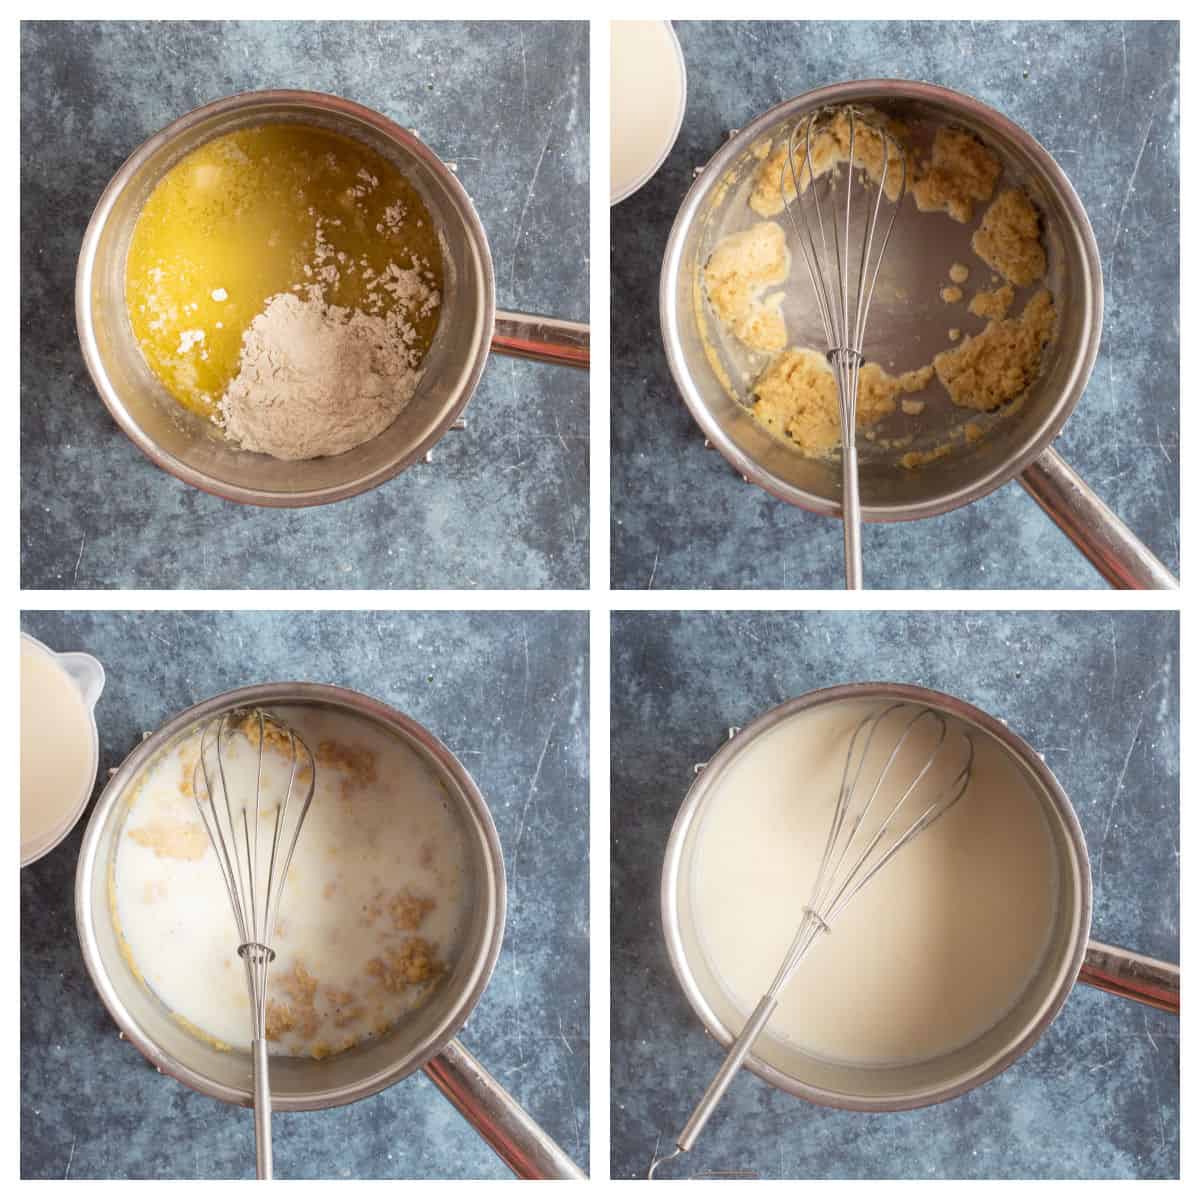 Step by step photo instructions for making a cheese sauce for cauliflower cheese.